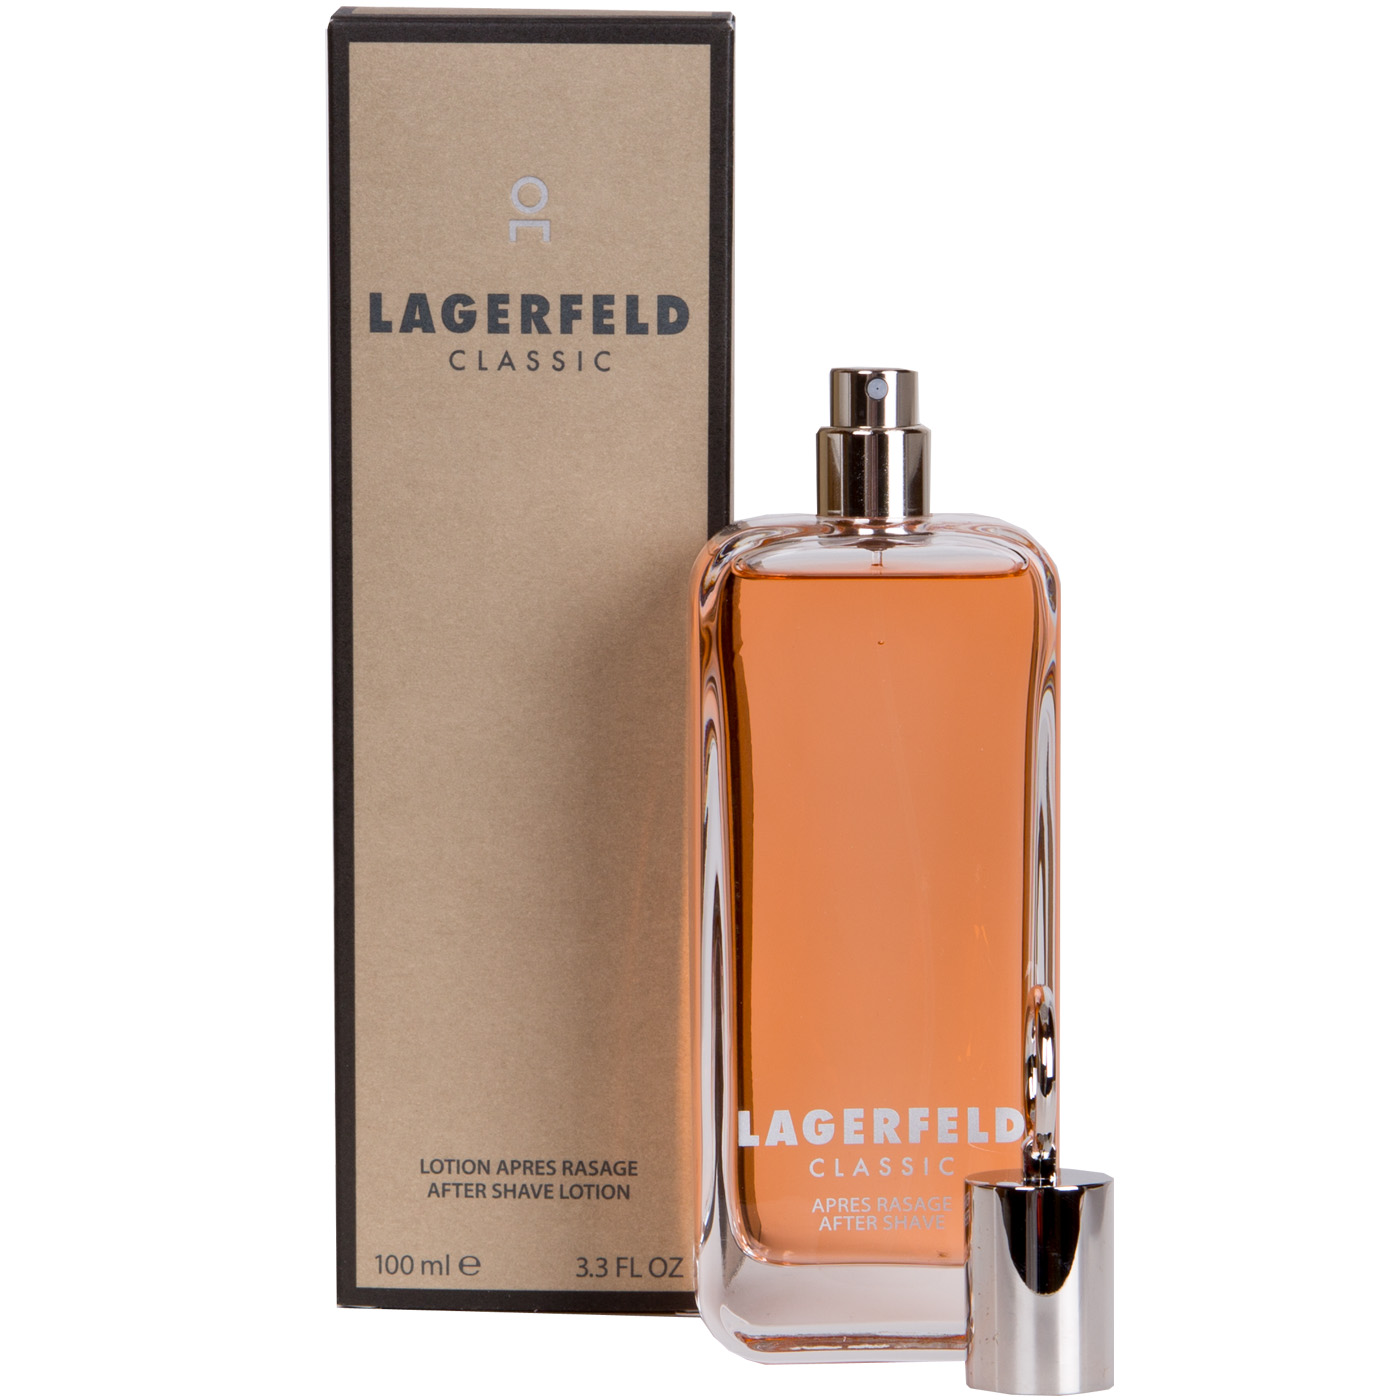 Lagerfeld Classic After Shave Lotion Spray 100 ML. for you in foil | eBay